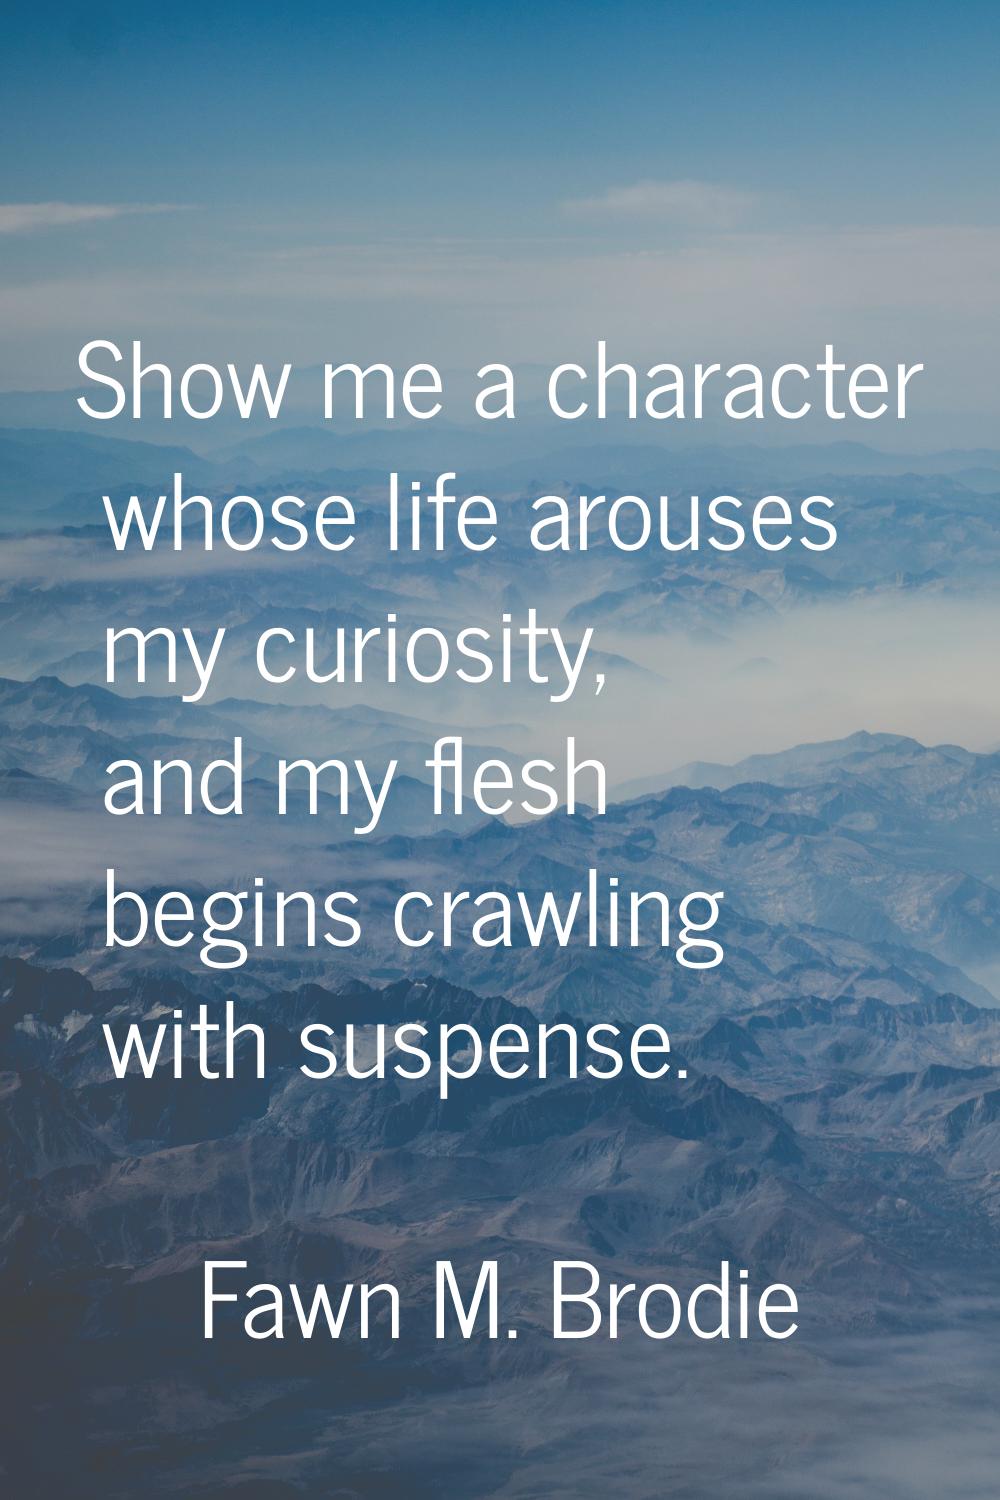 Show me a character whose life arouses my curiosity, and my flesh begins crawling with suspense.